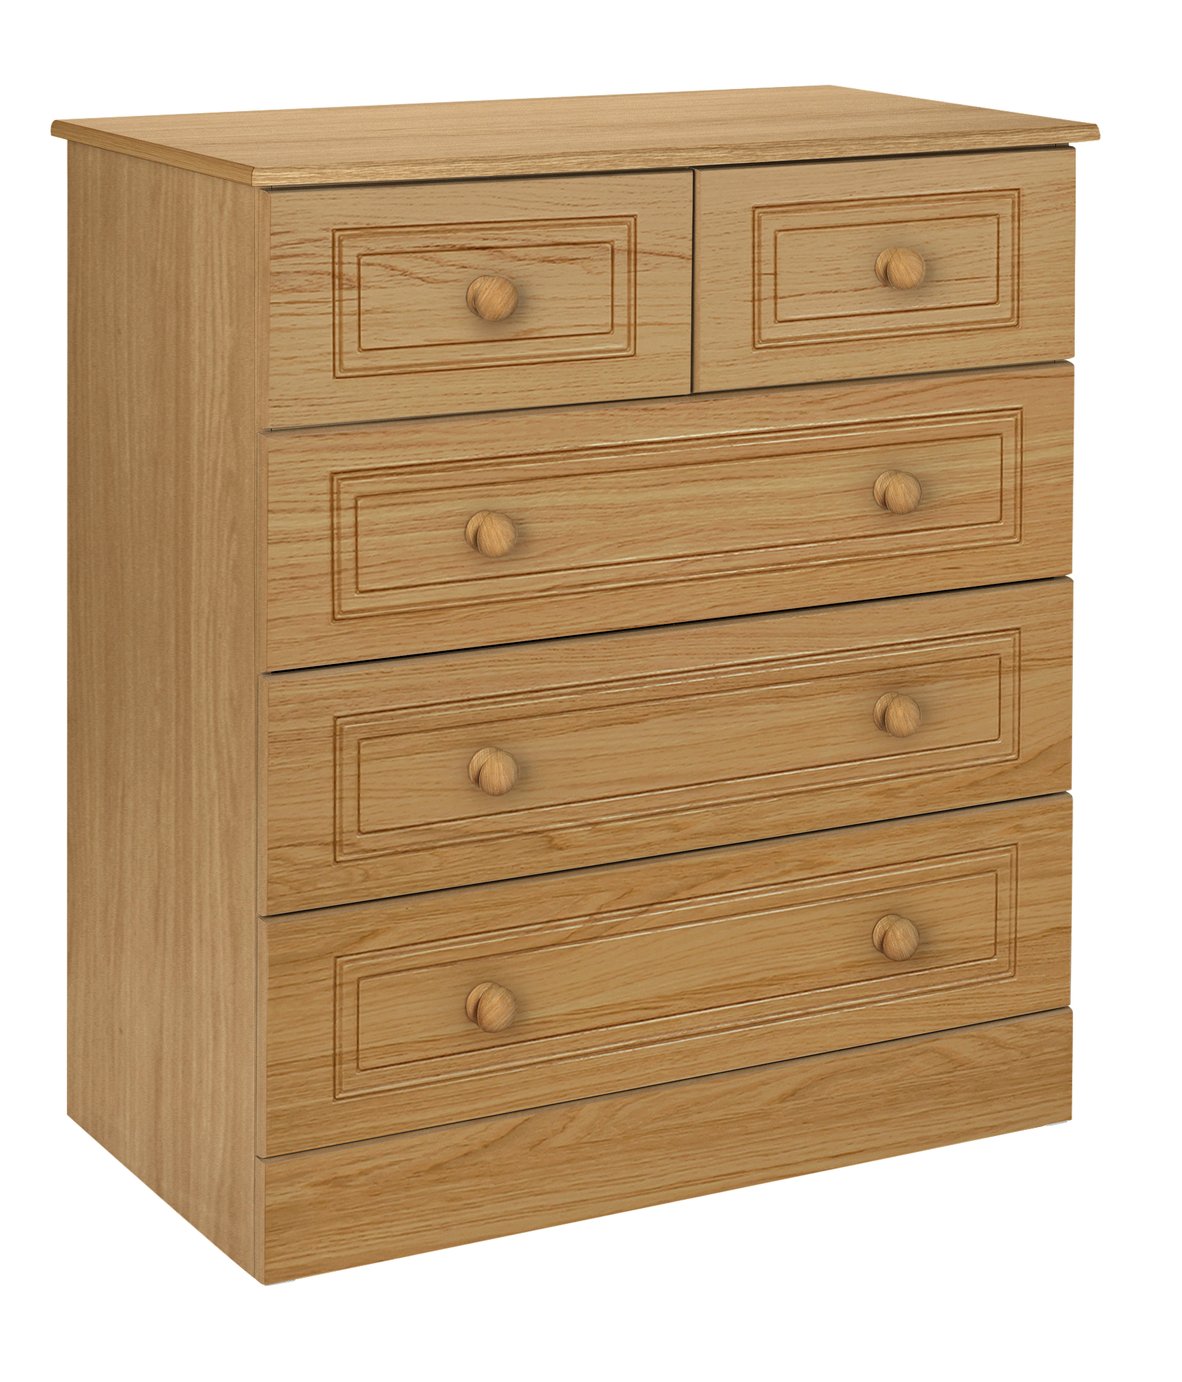 Collection Stratford 3+2 Drawer Chest - Oak Effect. Review